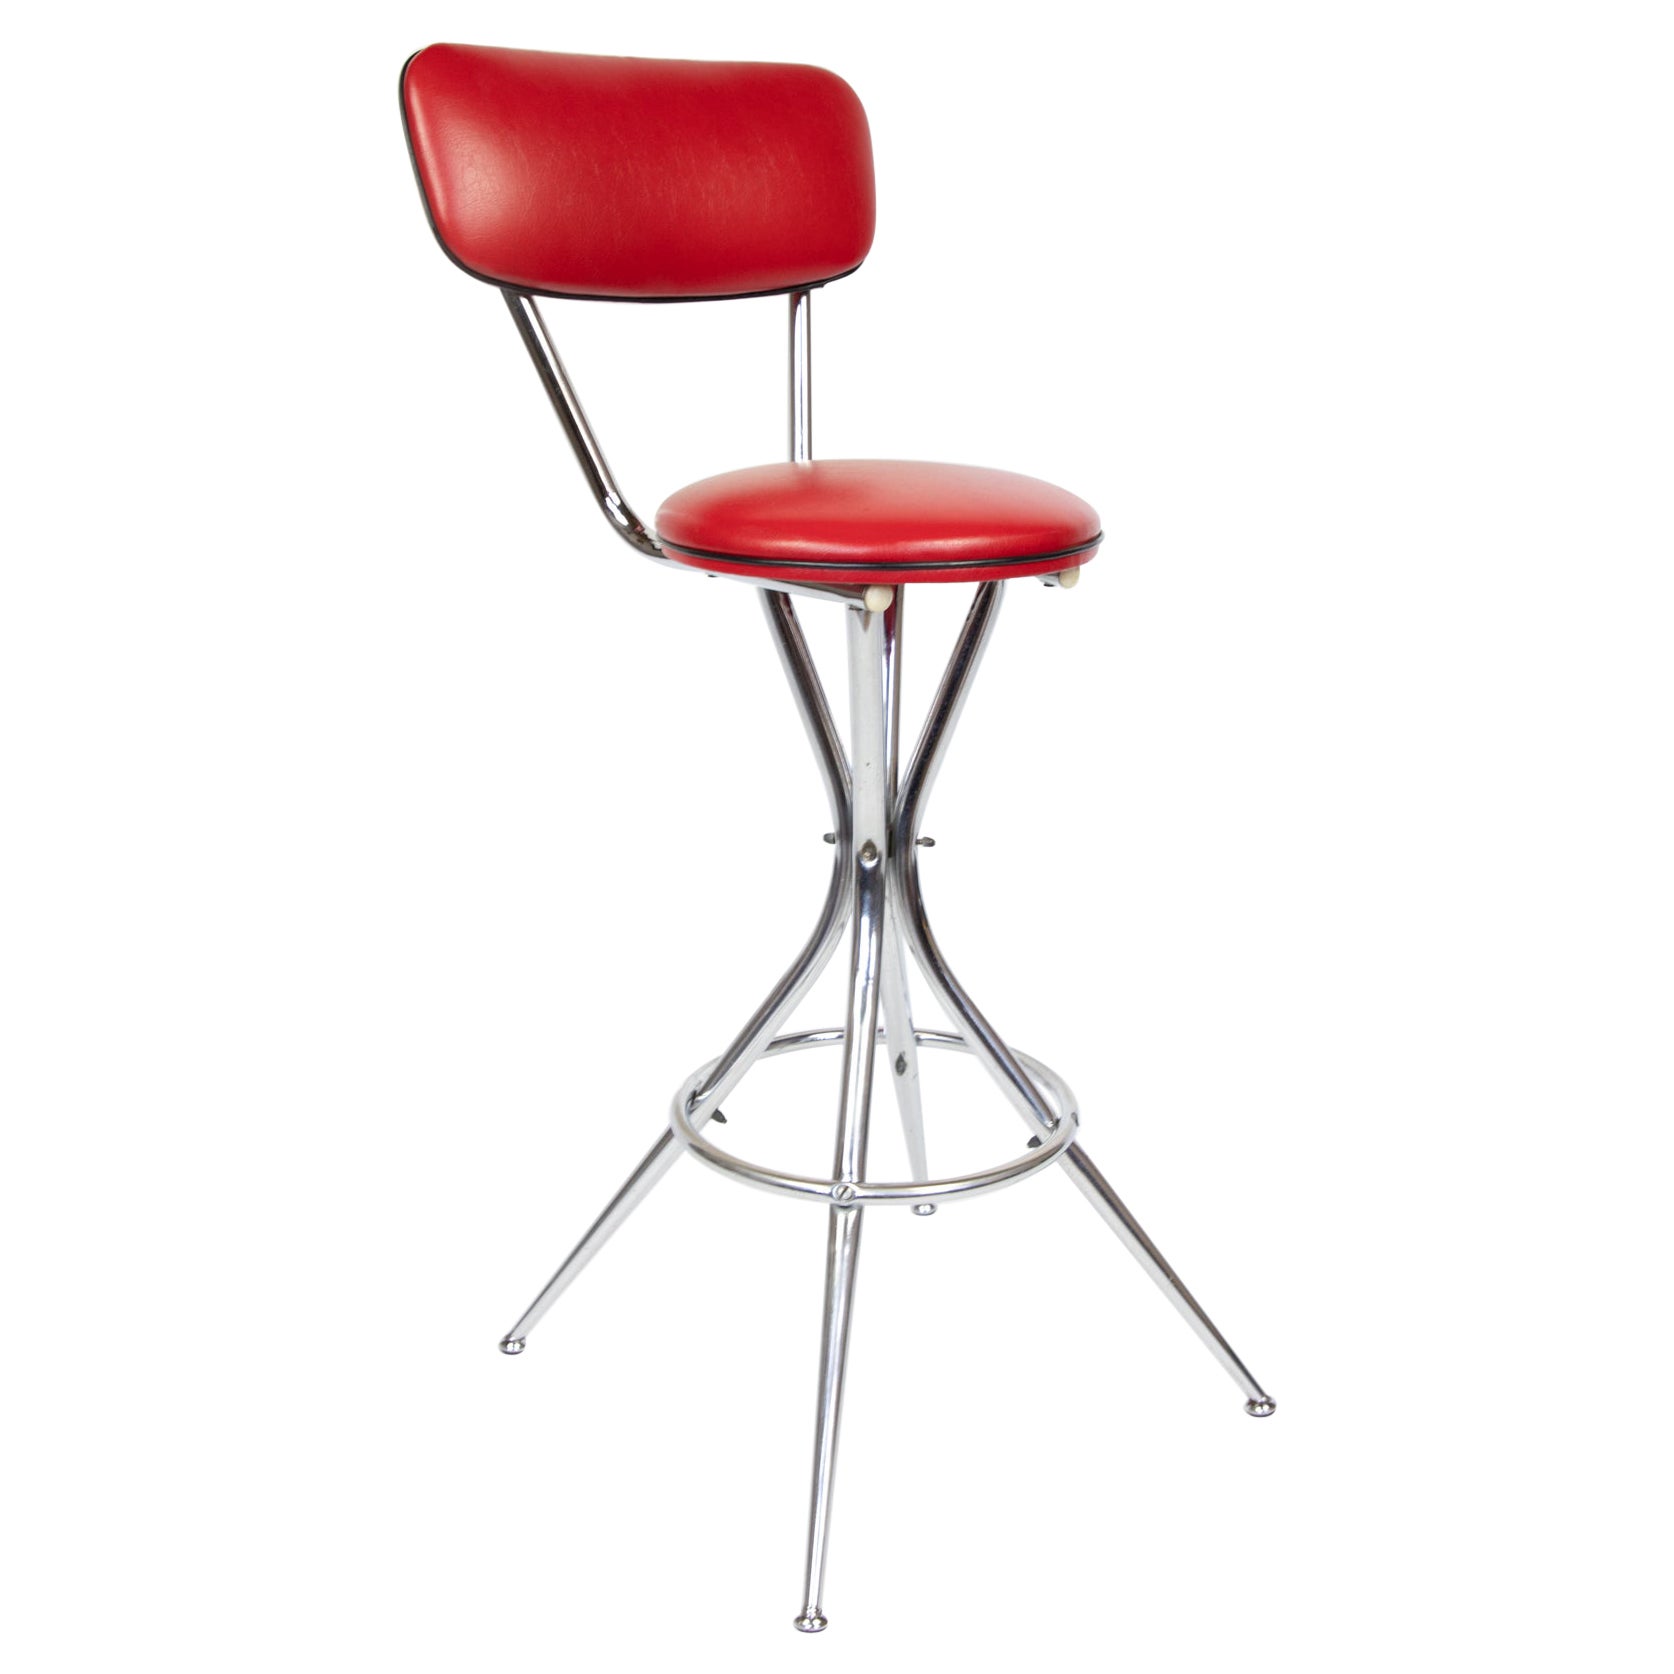 Mid Century Modern Bar Stool in Red Faux Leather, Chrome , Italy, 1950s For Sale